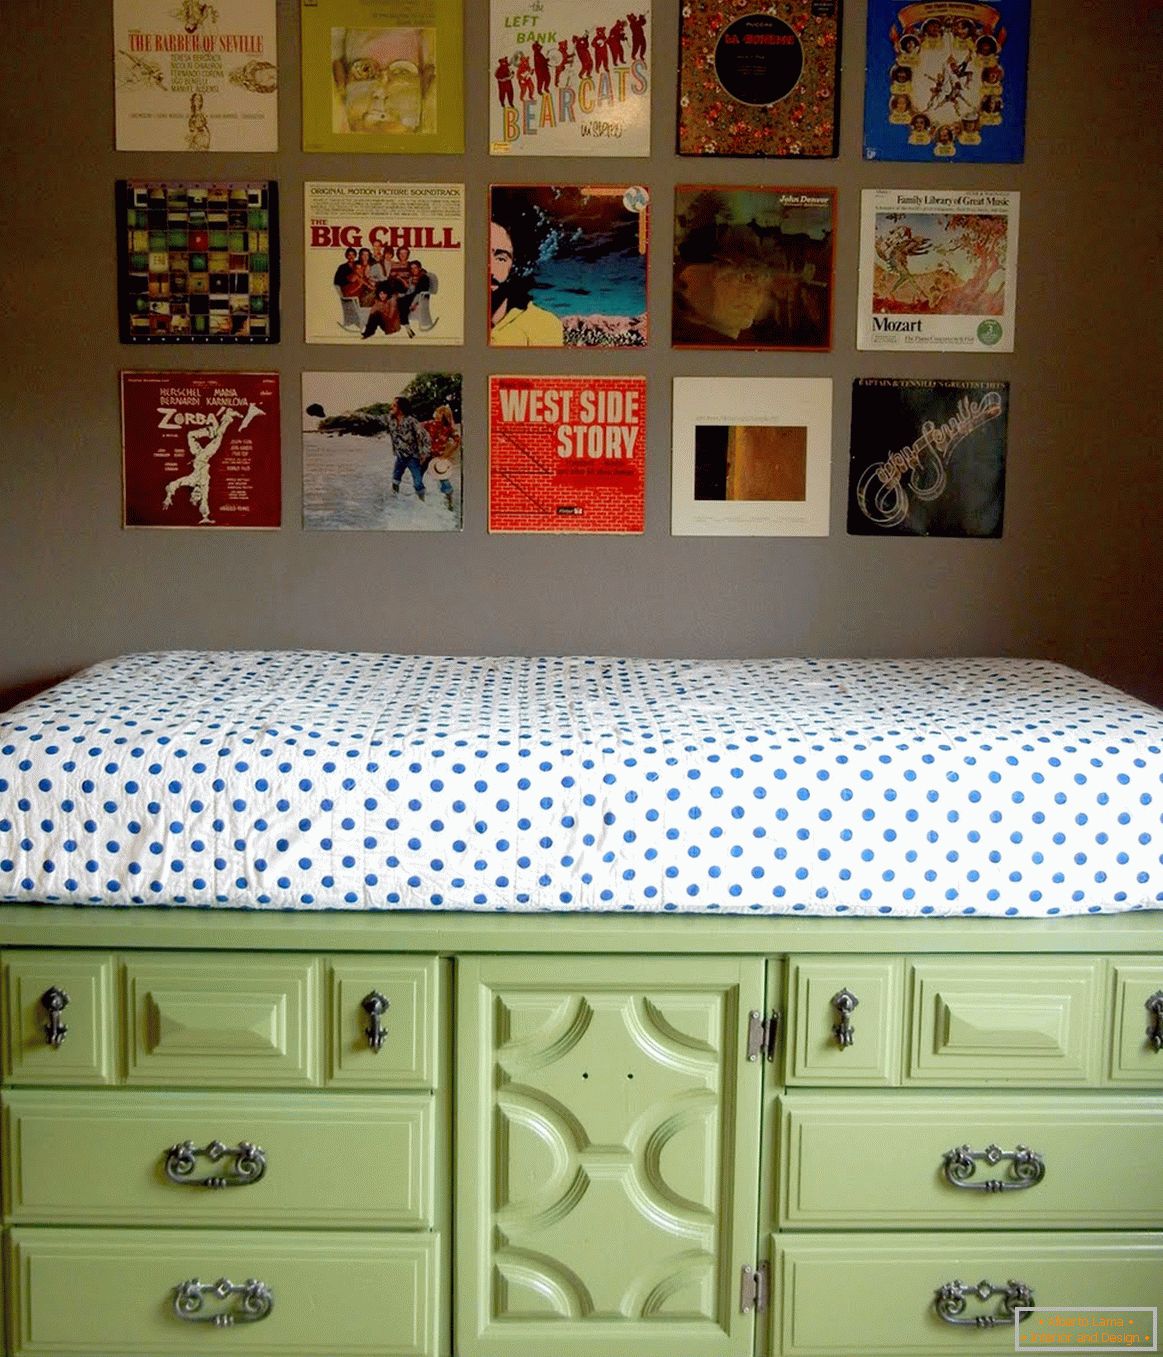 The original way to replace a simple cabinet as a bed